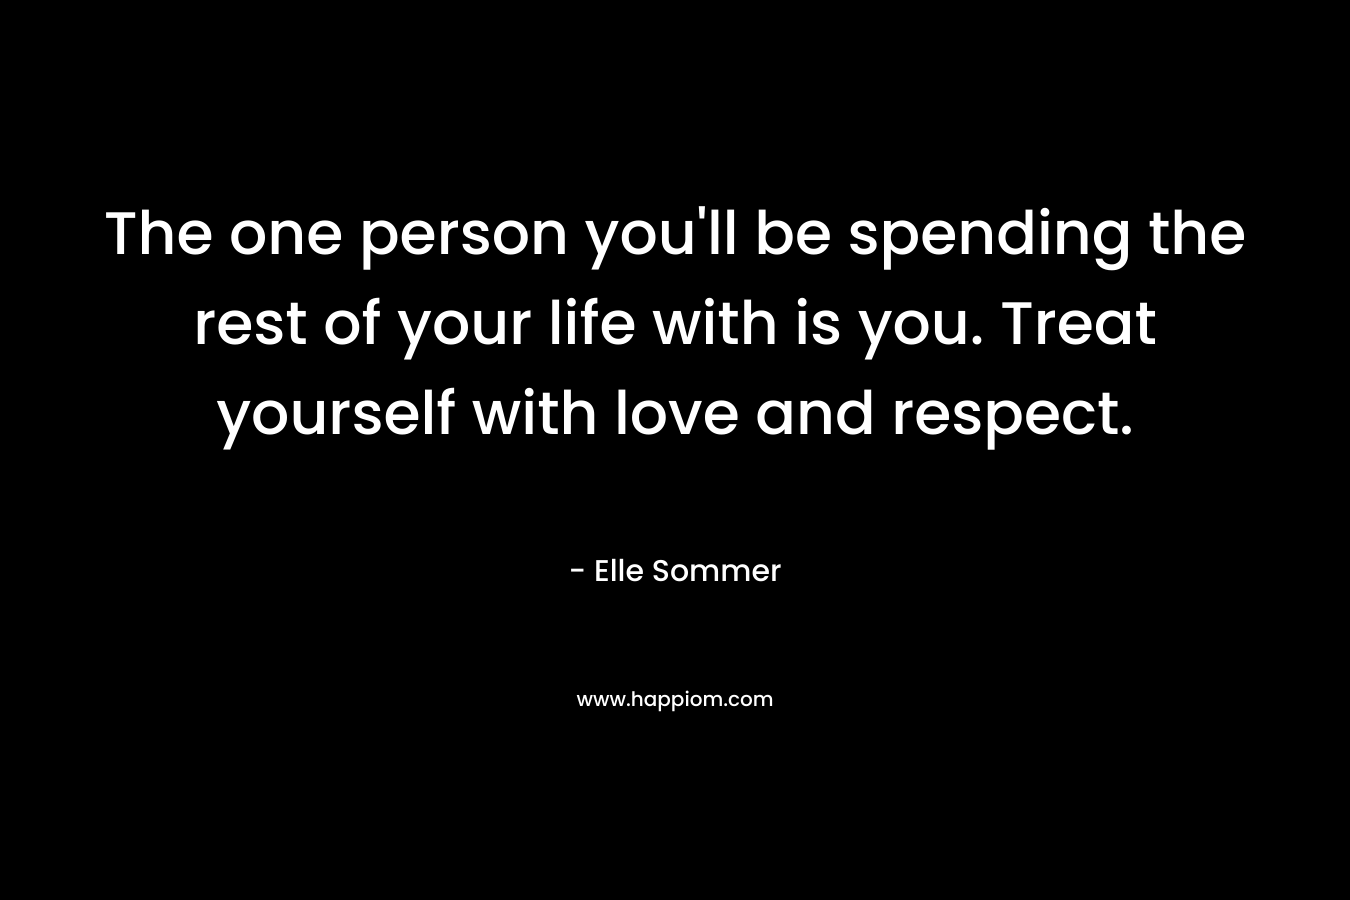 The one person you'll be spending the rest of your life with is you. Treat yourself with love and respect.